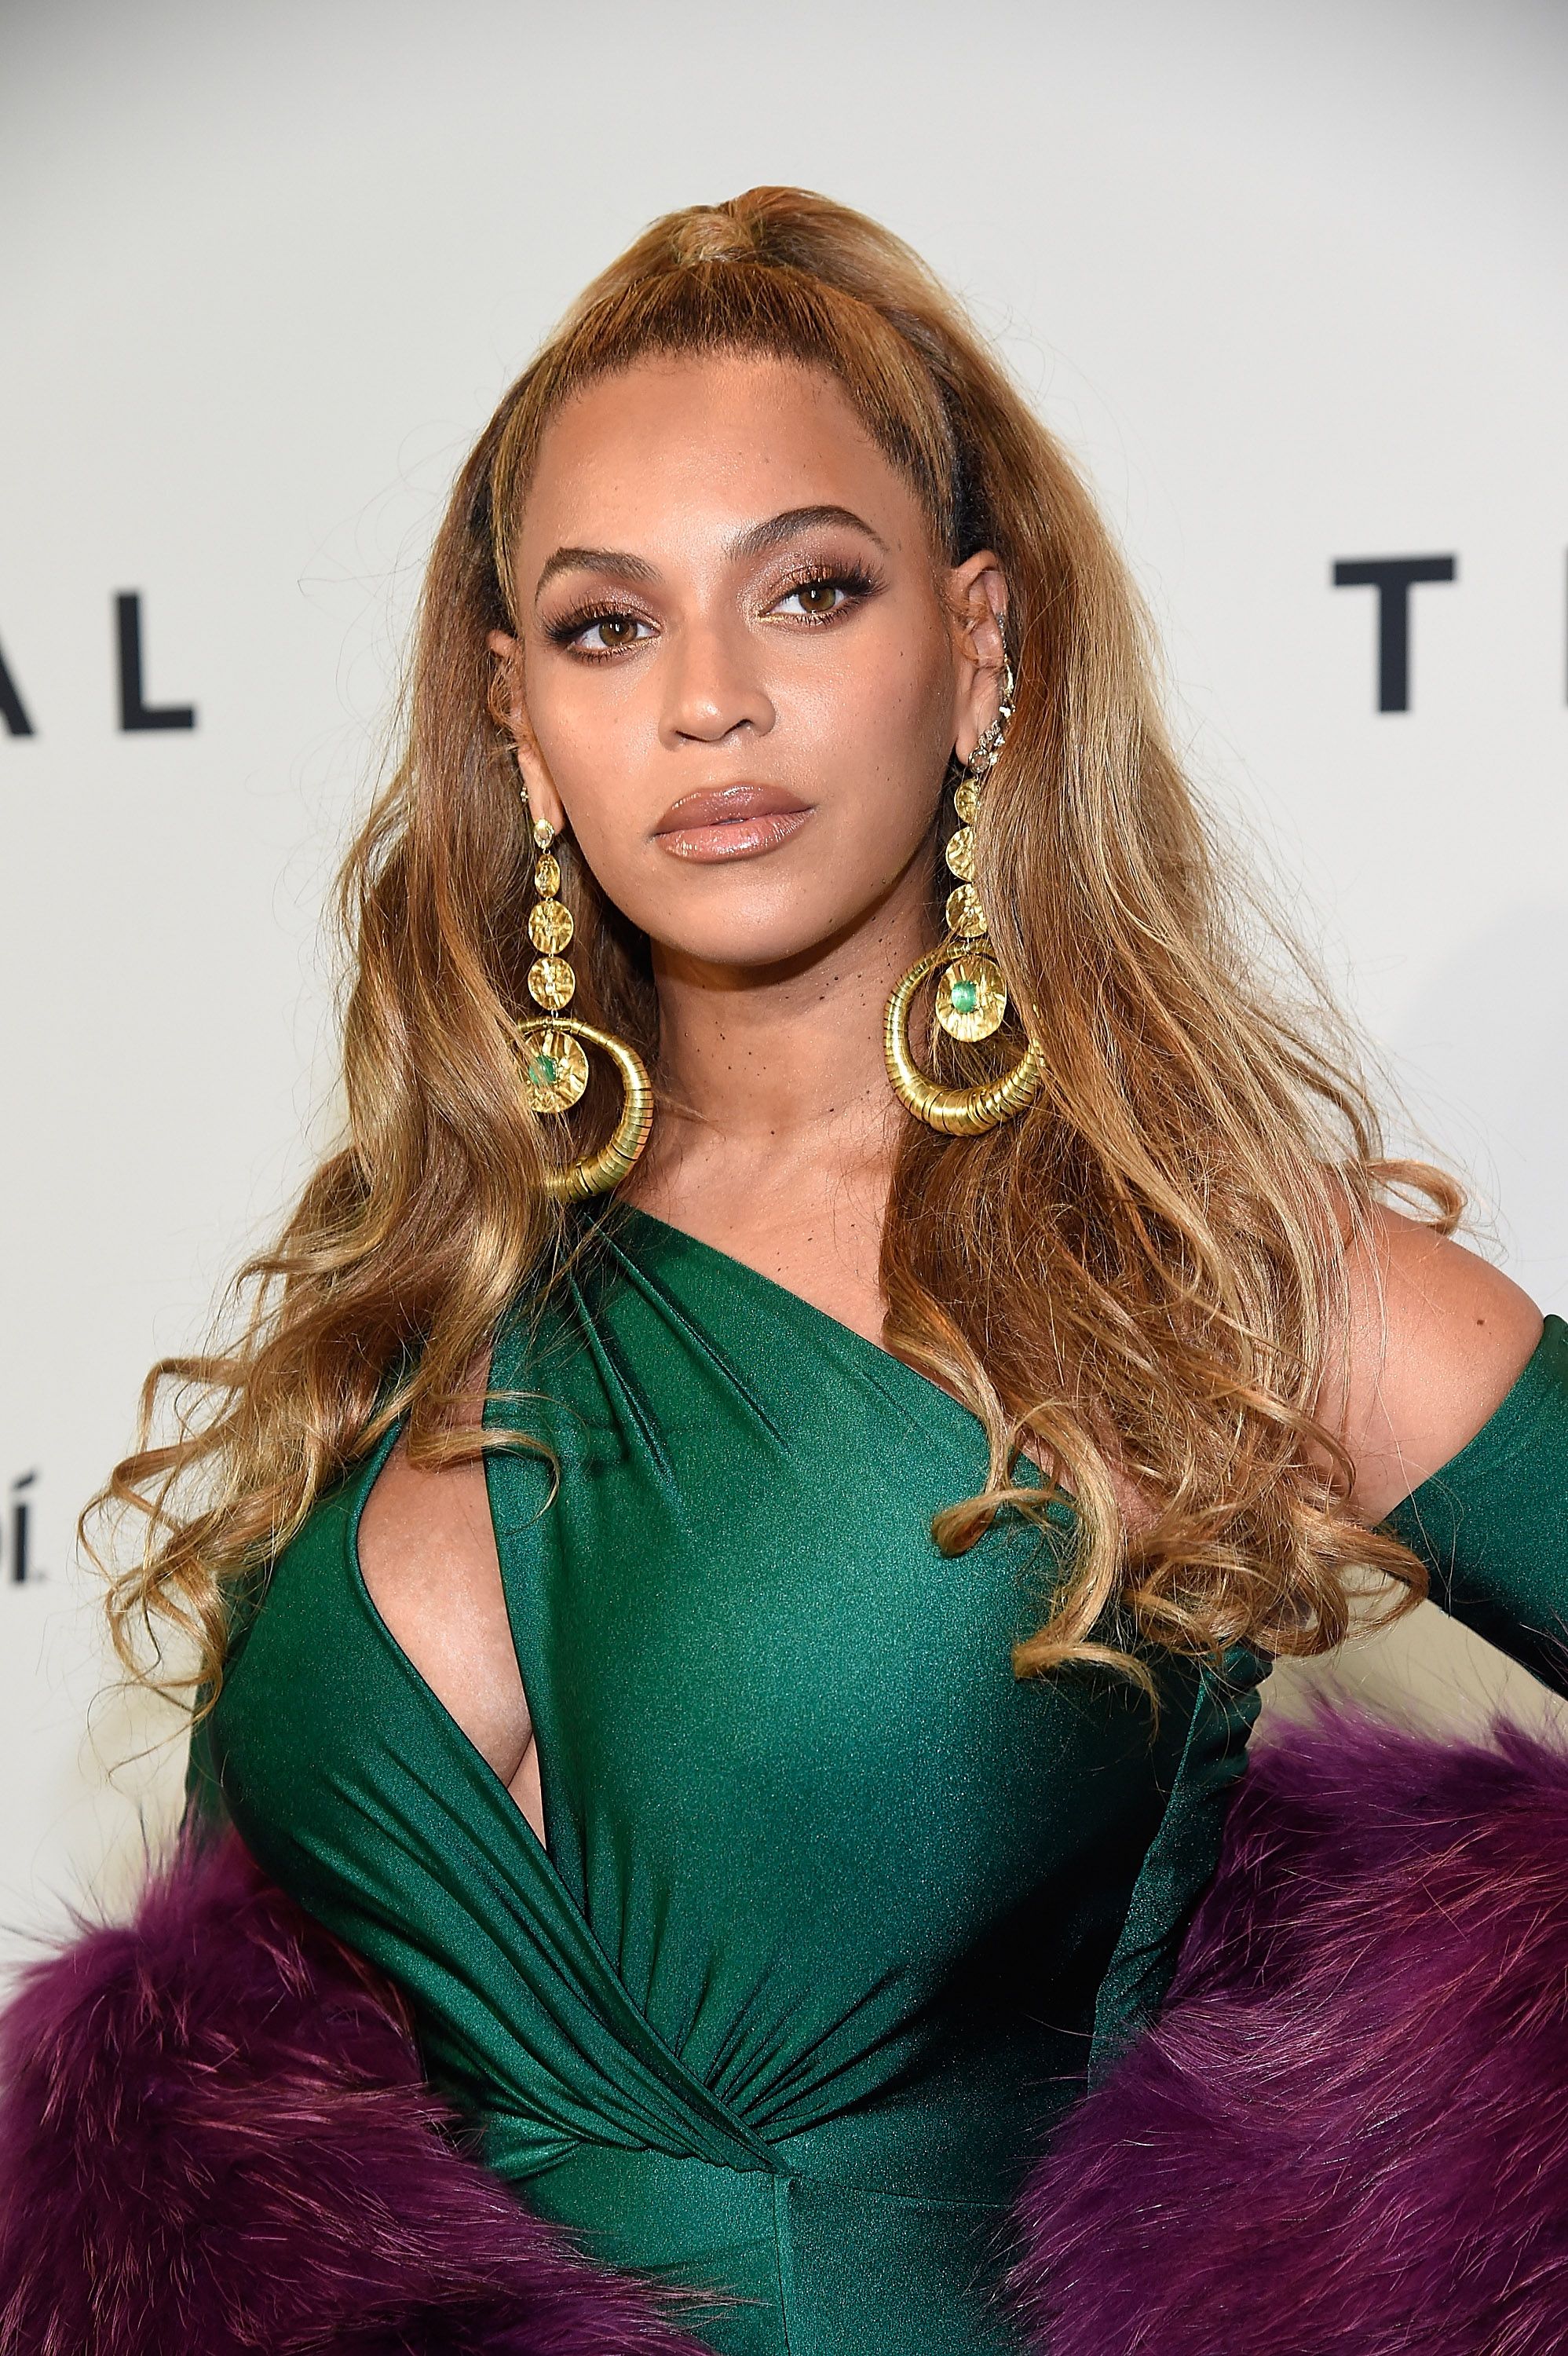 Beyonce attends TIDAL X: Brooklyn at Barclays Center of Brooklyn on October 17, 2017 in New York City.. | Photo: Getty Images